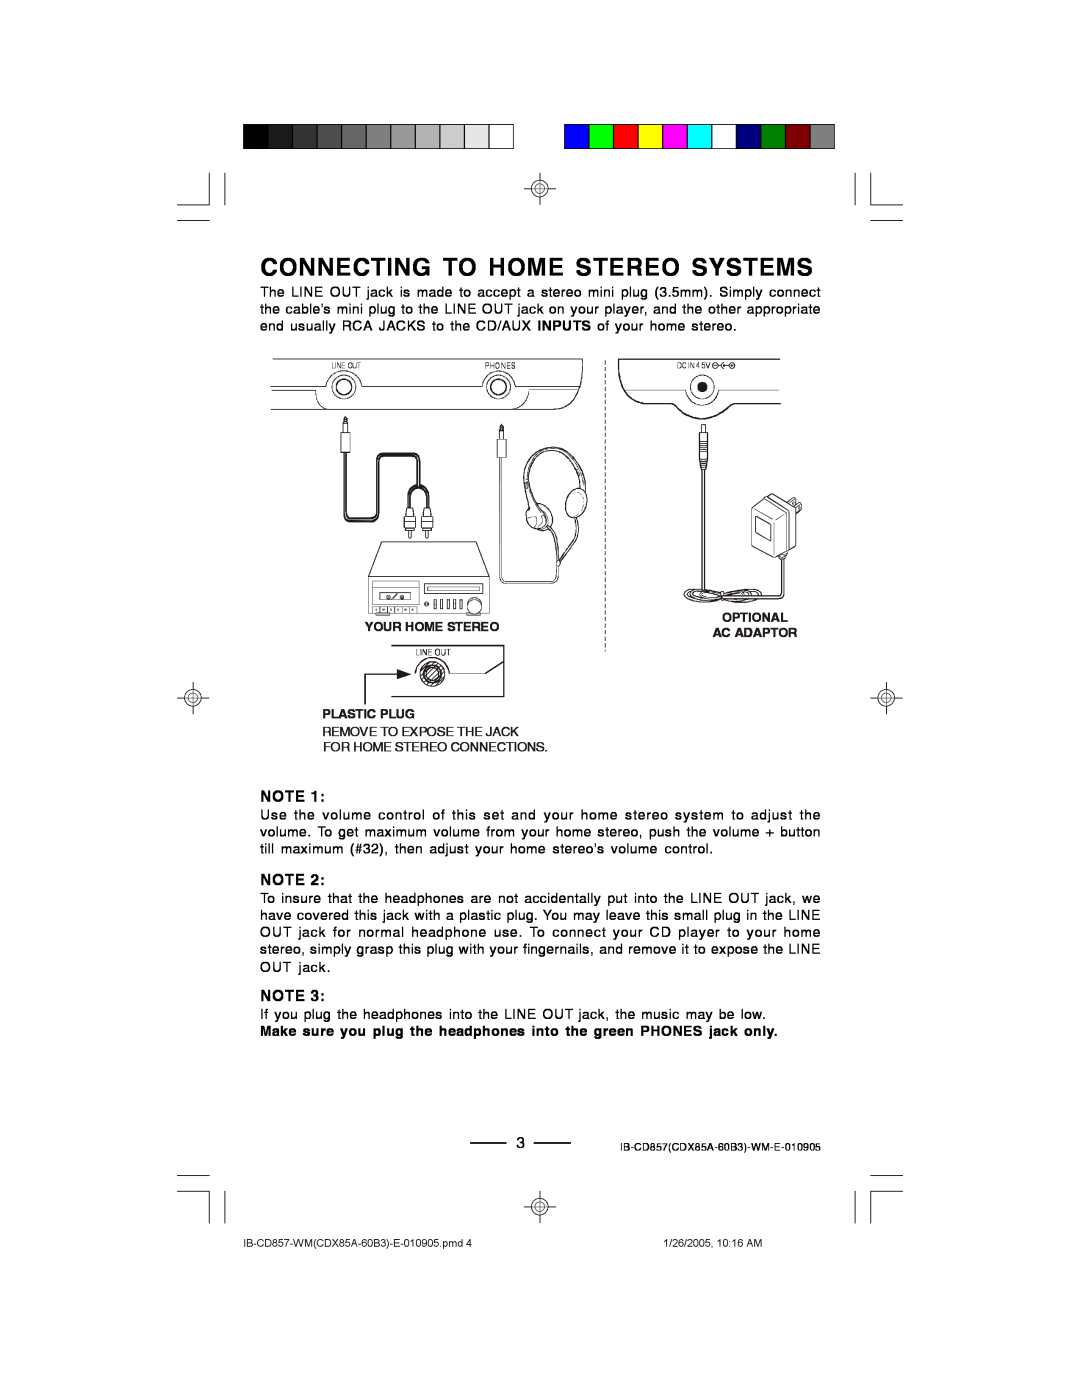 Lenoxx Electronics CD-857 manual Connecting To Home Stereo Systems, Your Home Stereo, Ac Adaptor, Plastic Plug 